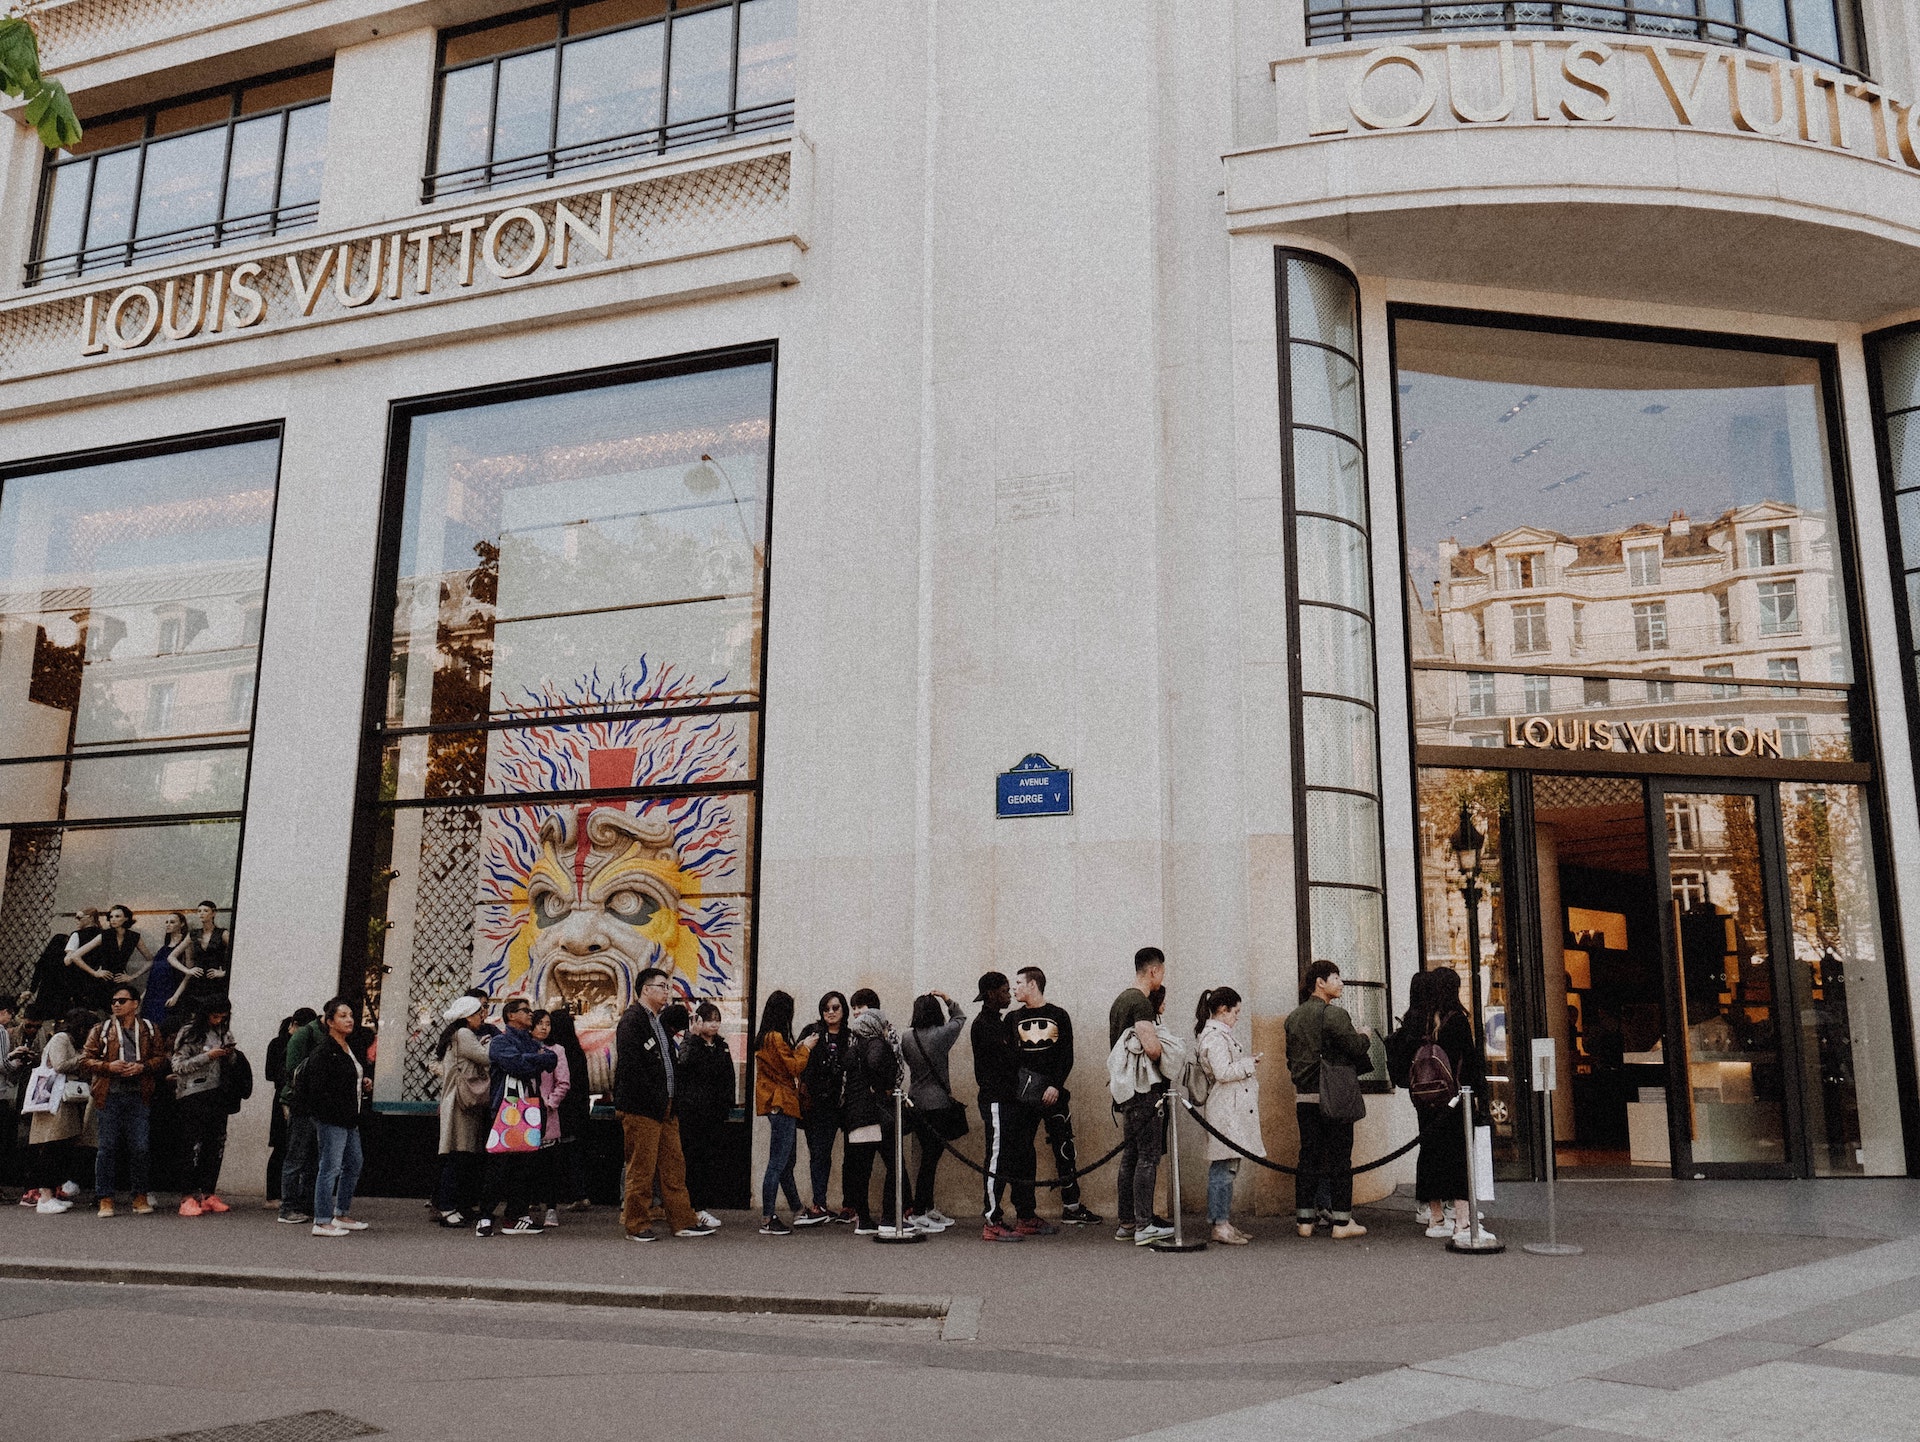 Customers lining up outside a Louis Vuitton store